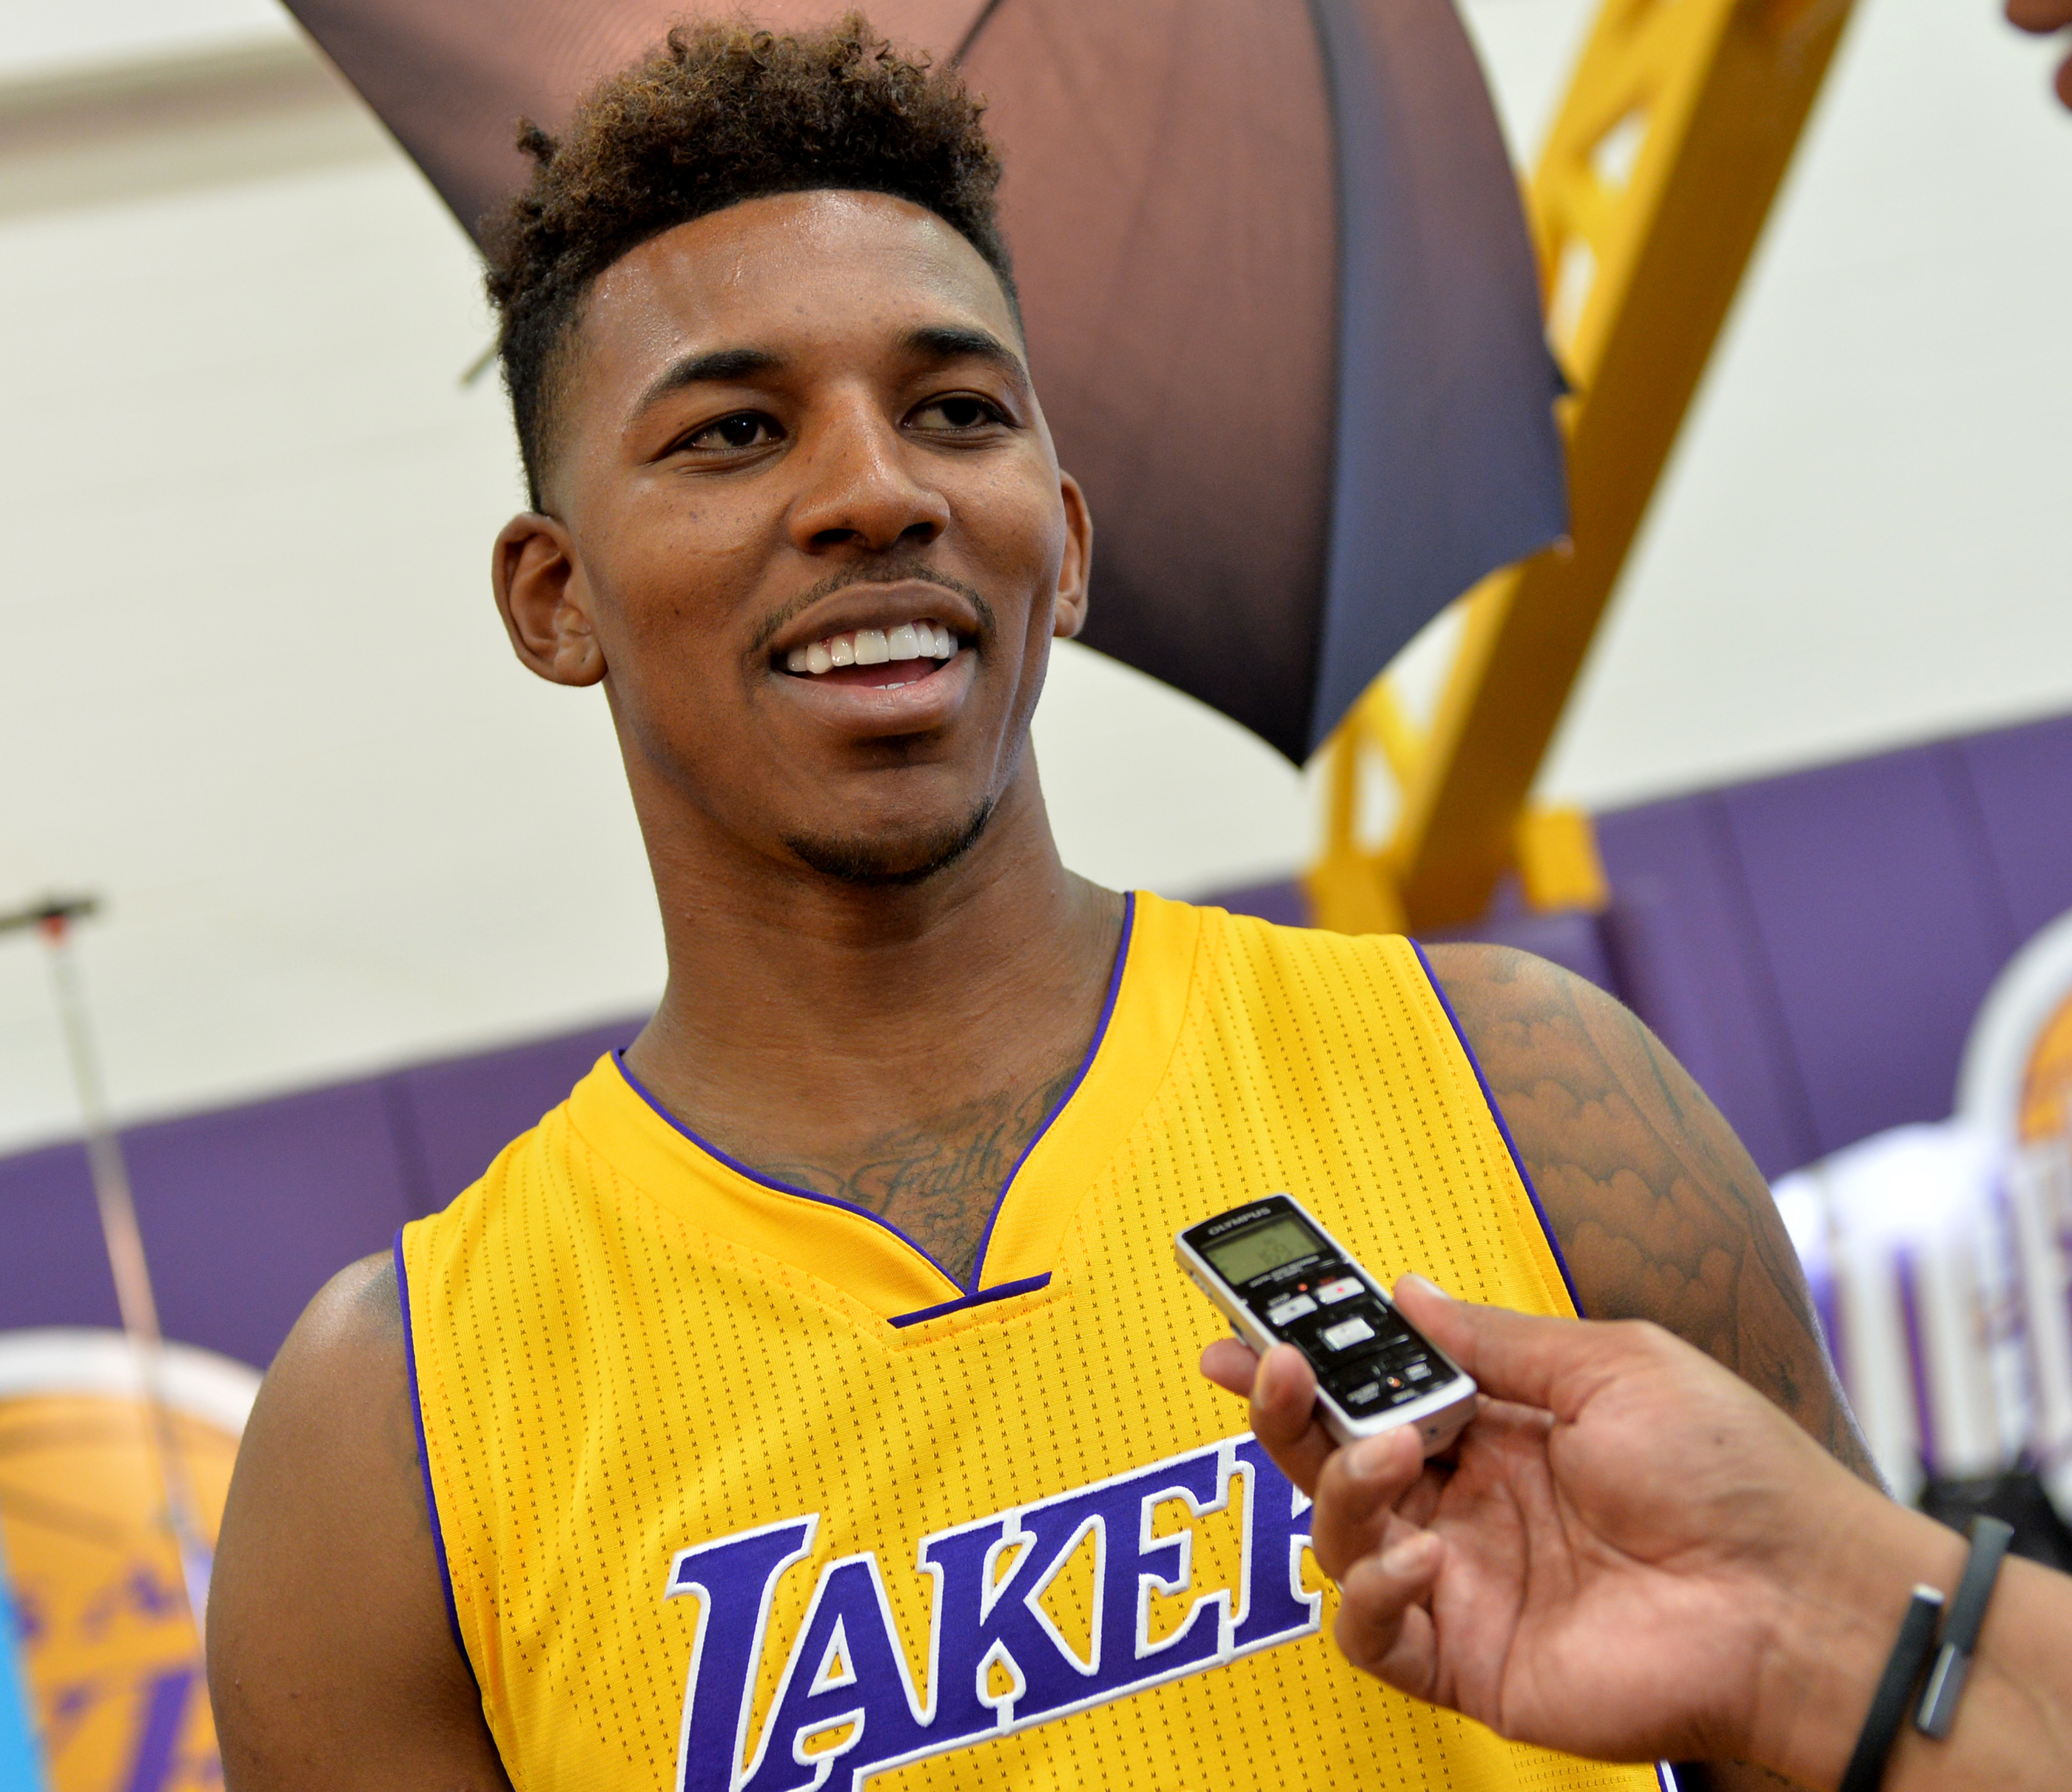 Los Angeles Lakers Media Day in El Segundo Monday September 28, 2015. Nick Young smiles during interview. Photo By  Robert Casillas / Daily Breeze